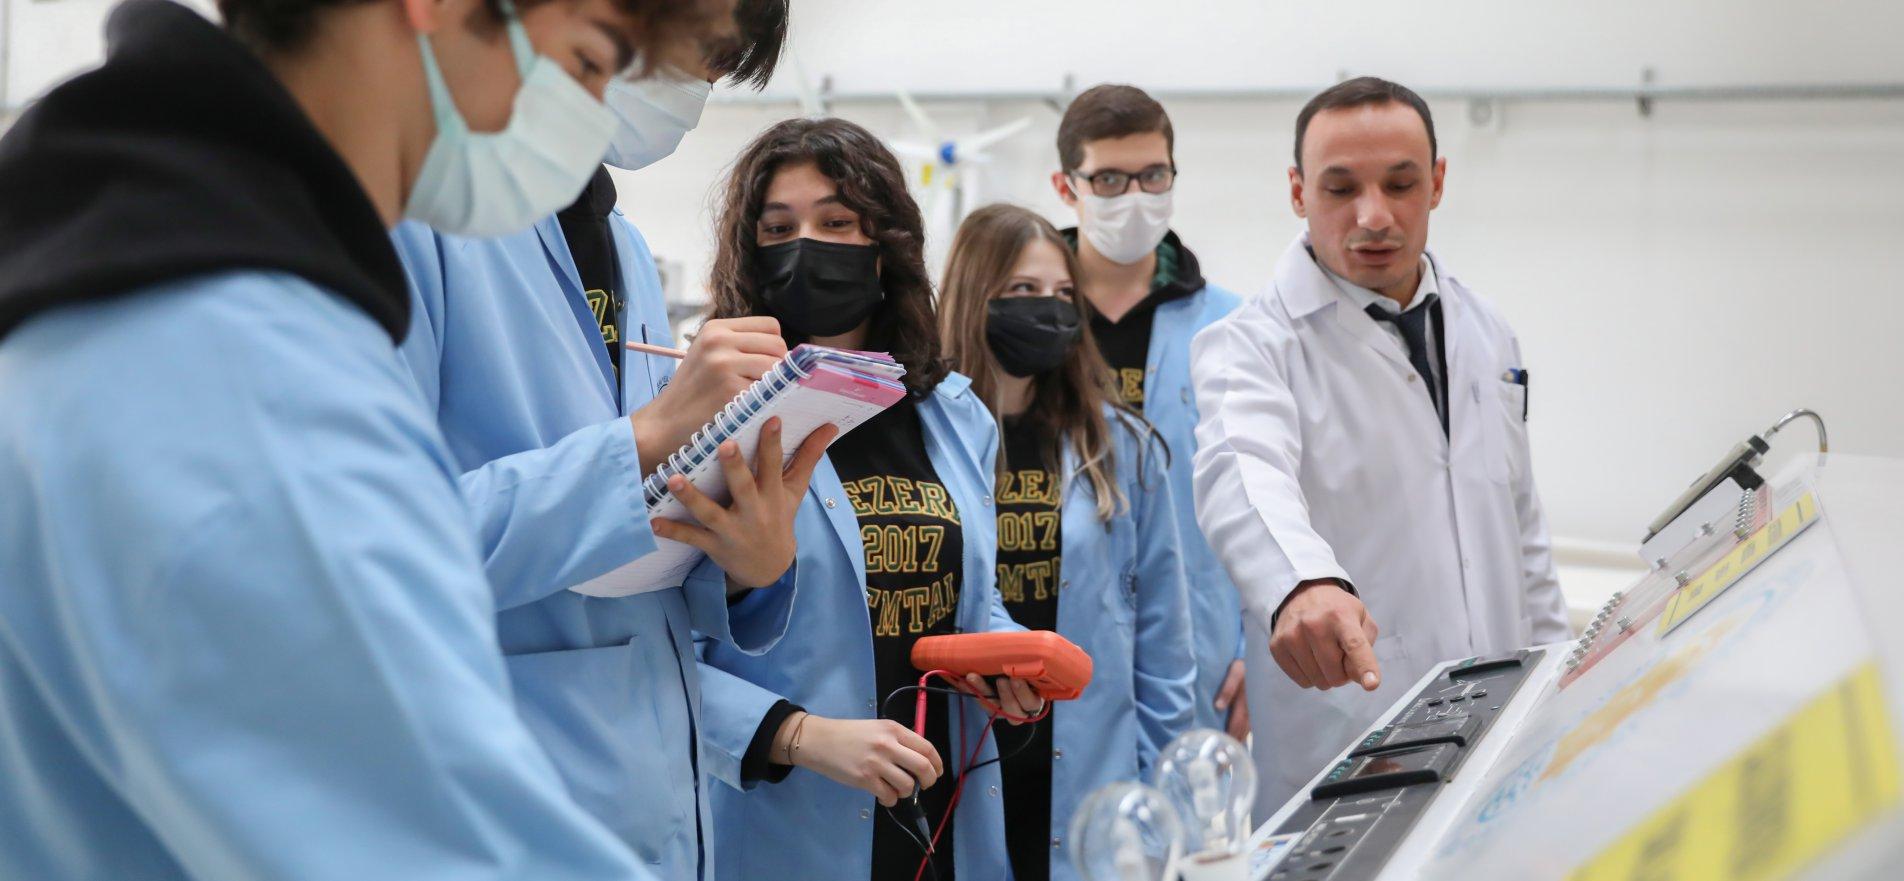 CEZERİ YEŞİL TECHNOLOGY HIGH SCHOOL WAS RANKED SECOND IN THE LIST OF MOST INNOVATIVE SCHOOLS IN EUROPE